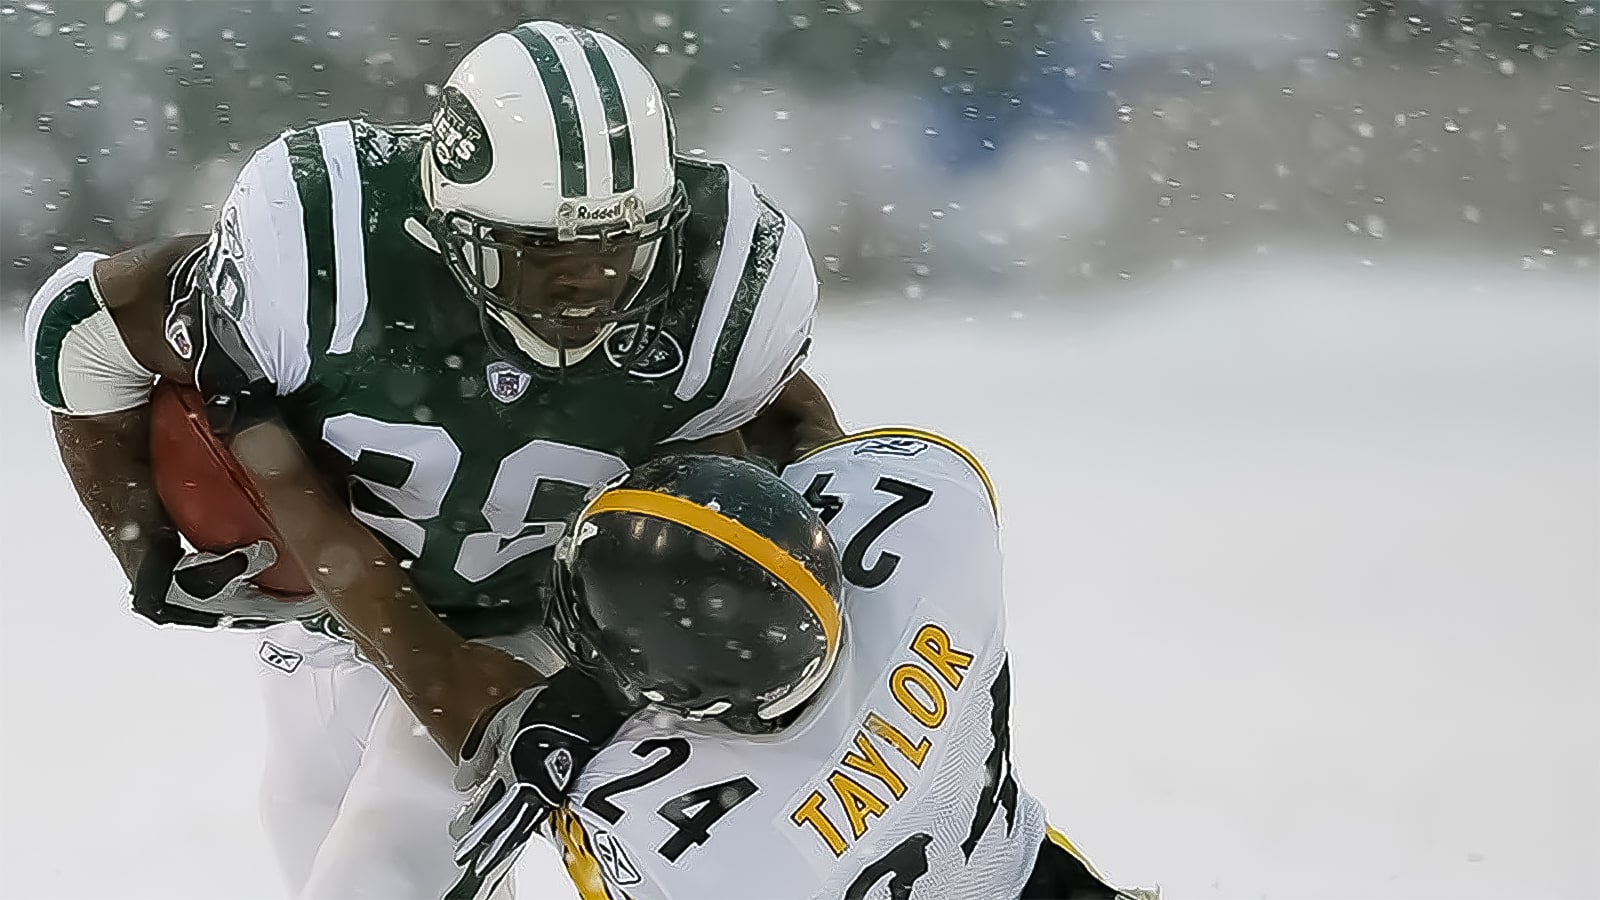 UNITED STATES - DECEMBER 14: The New York Jets' Curtis Martin tries to break free of a tackle by the Pittsburgh Steelers' Ike Taylor on a snowy field in the first half at Giants Stadium. The Jets triumphed, 6-0, on two field goals.